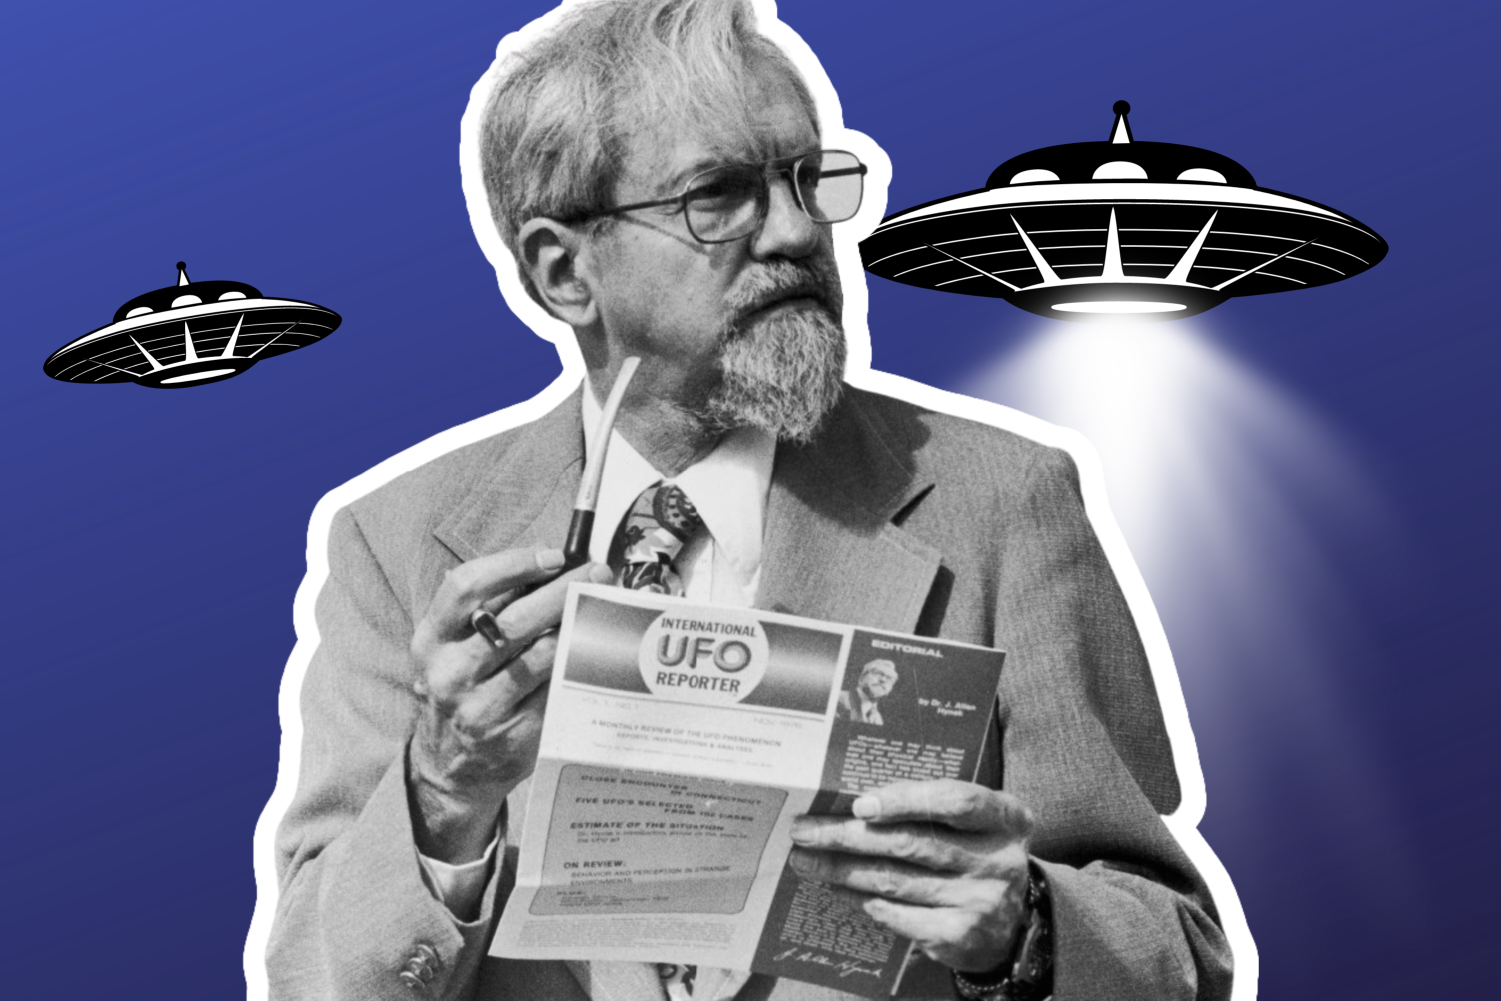 A+cut-out%2C+black-and-white+picture+of+Josef+Allen+Hynek+holding+a+copy+of+the+%E2%80%9CInternational+UFO+Reporter%E2%80%9D+against+a+purple+background+with+illustrated+UFOs.